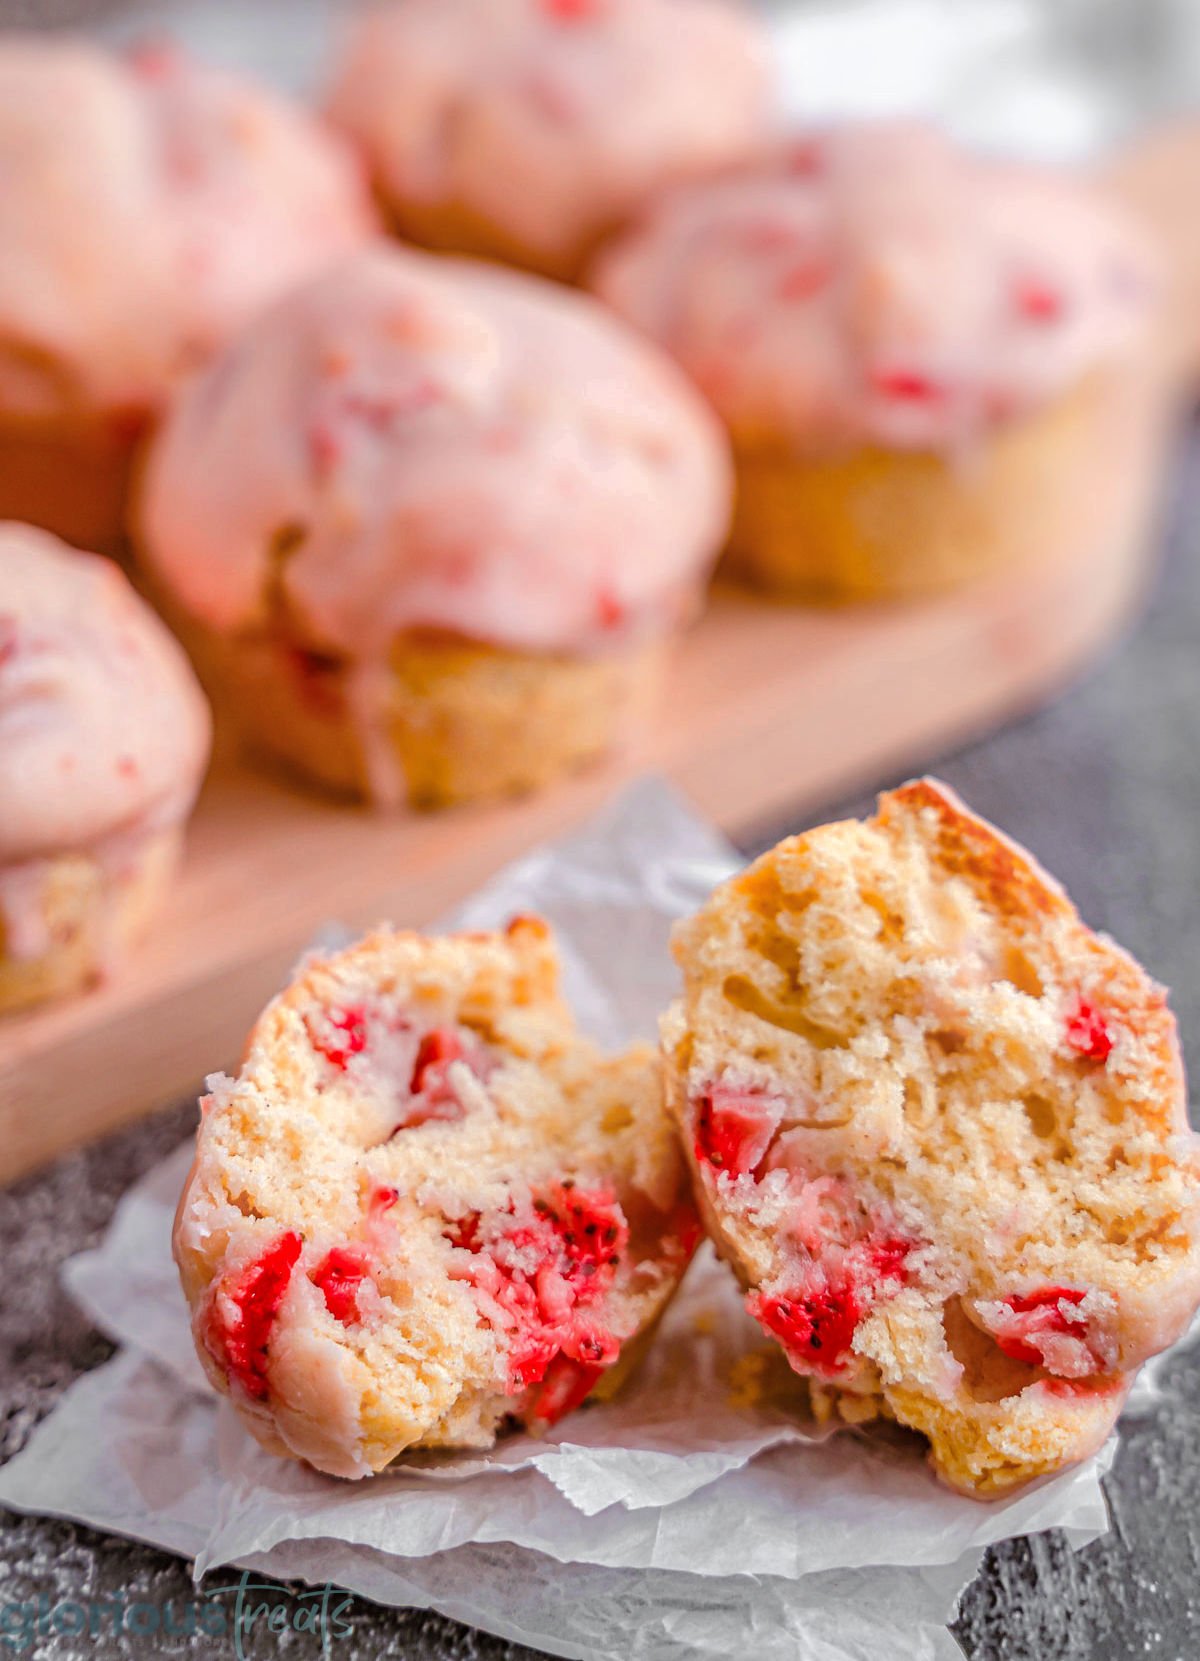 strawberry muffins with glaze on a cutting board. One muffin is broken in half to show the texture of the inside of the muffin.